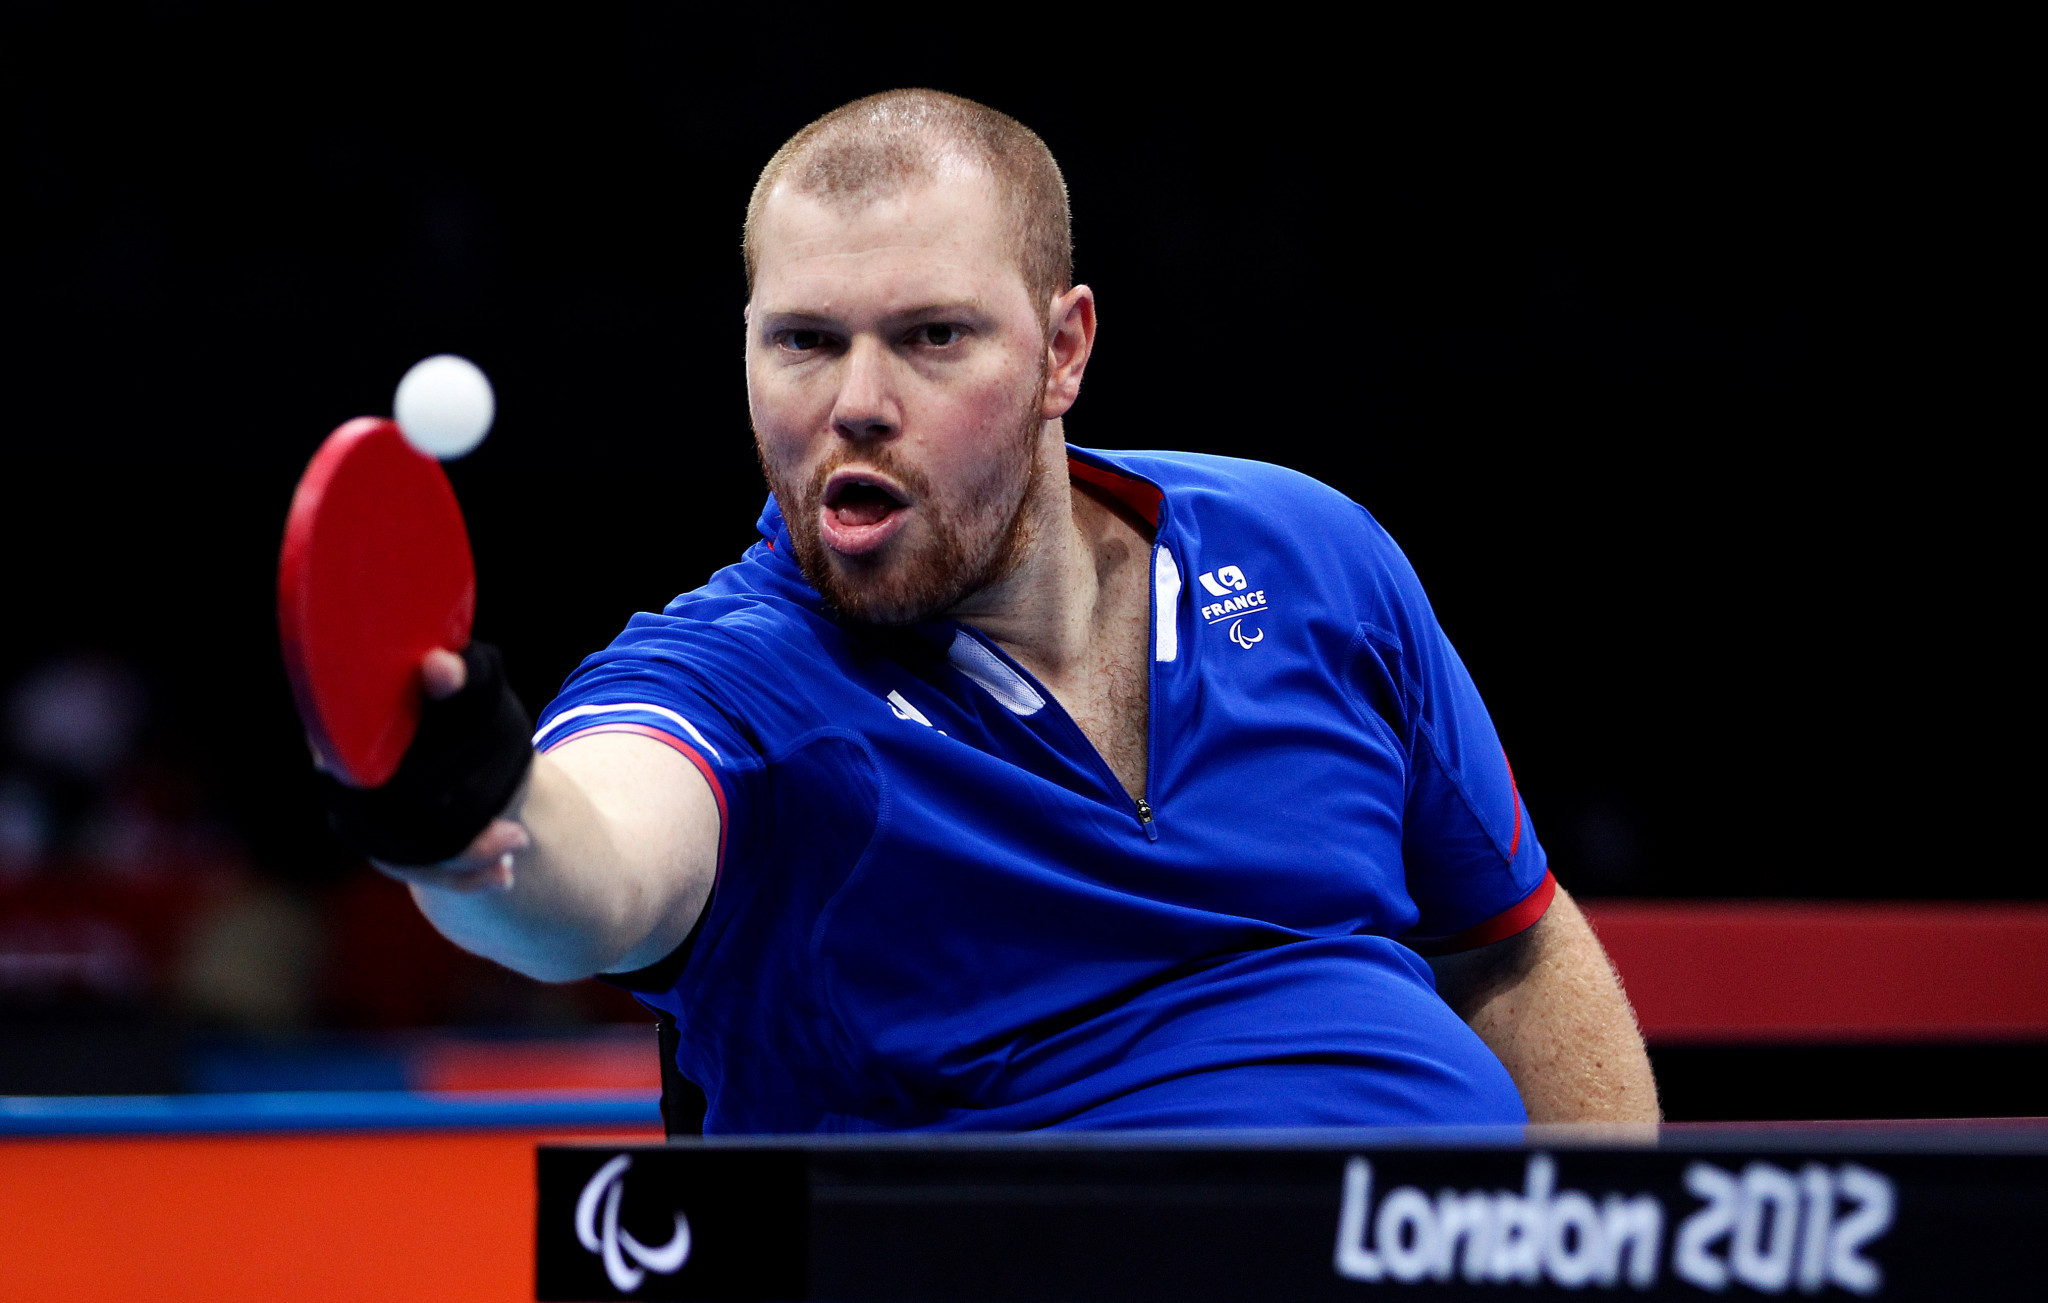 Lamirault completes double at Para European Table Tennis Championships 